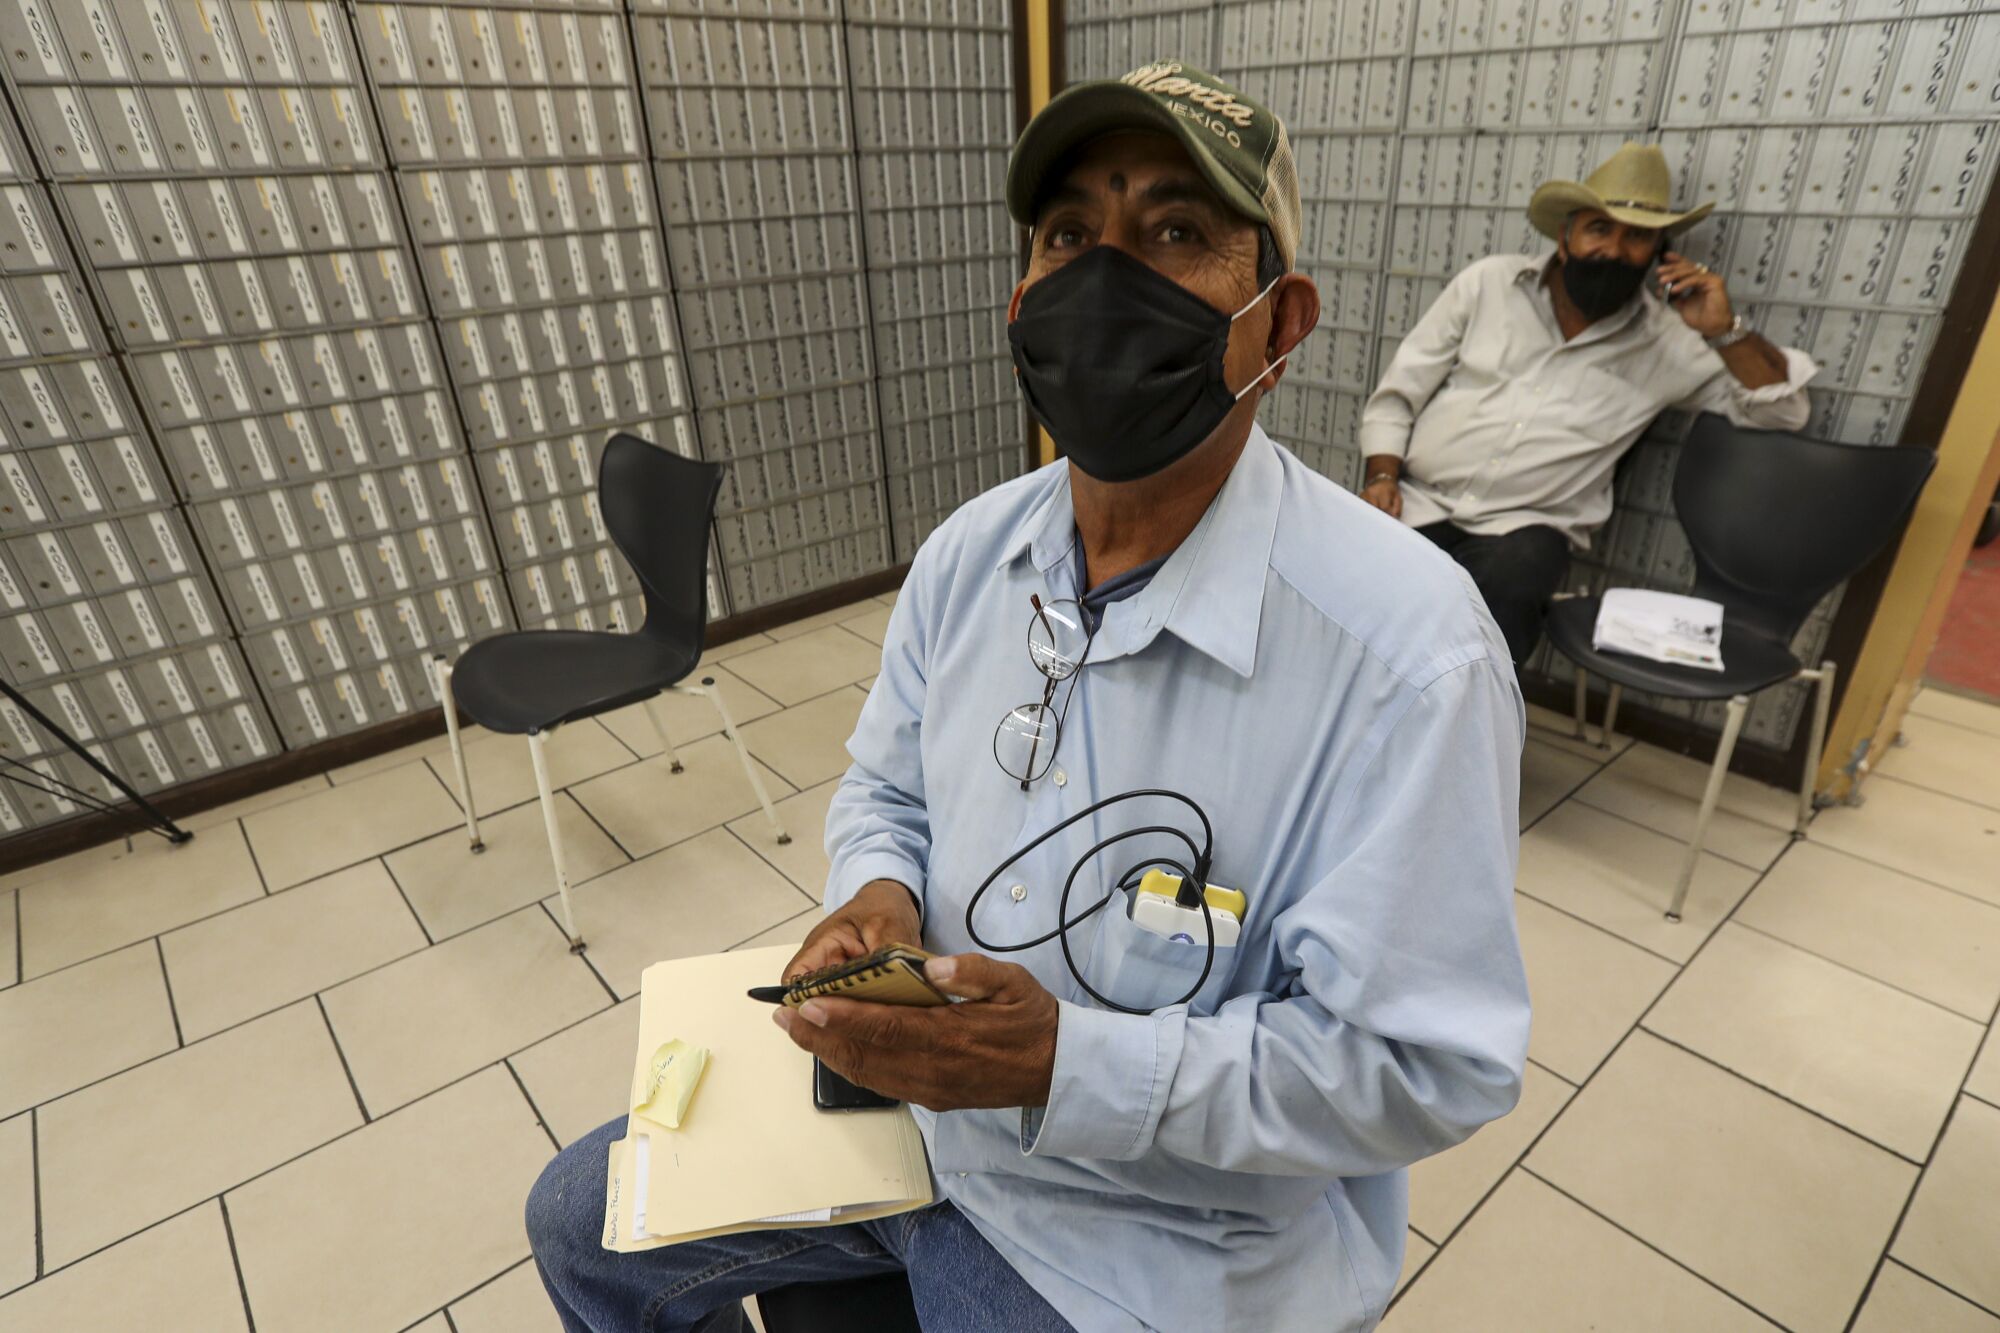 Fernando Fausto, 59, a resident of Mexicali, waits at a private service agency to file for unemployment in Calexico.